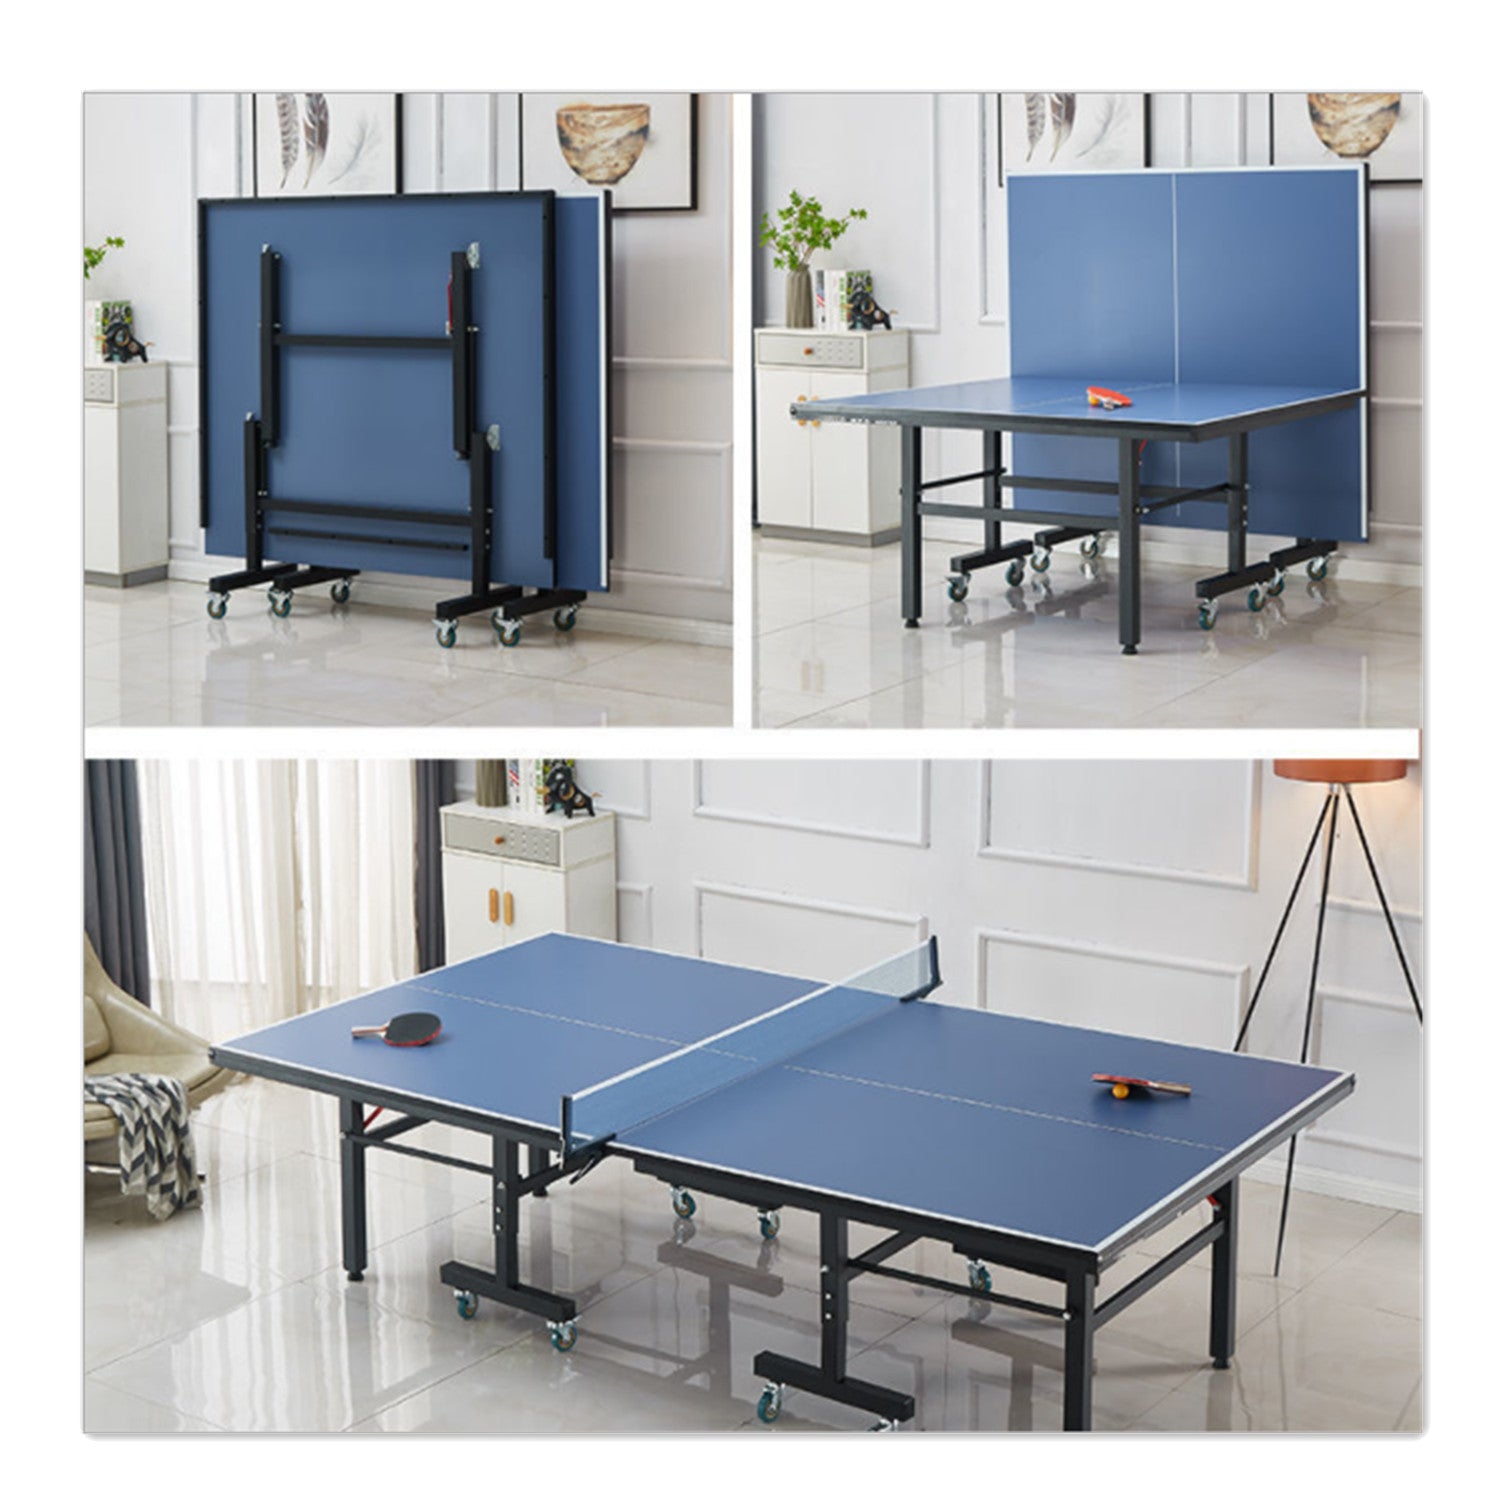 UXUAN SPORTS Indoor Elite Series 16mm Table Tennis Table|10-Minute Assembly